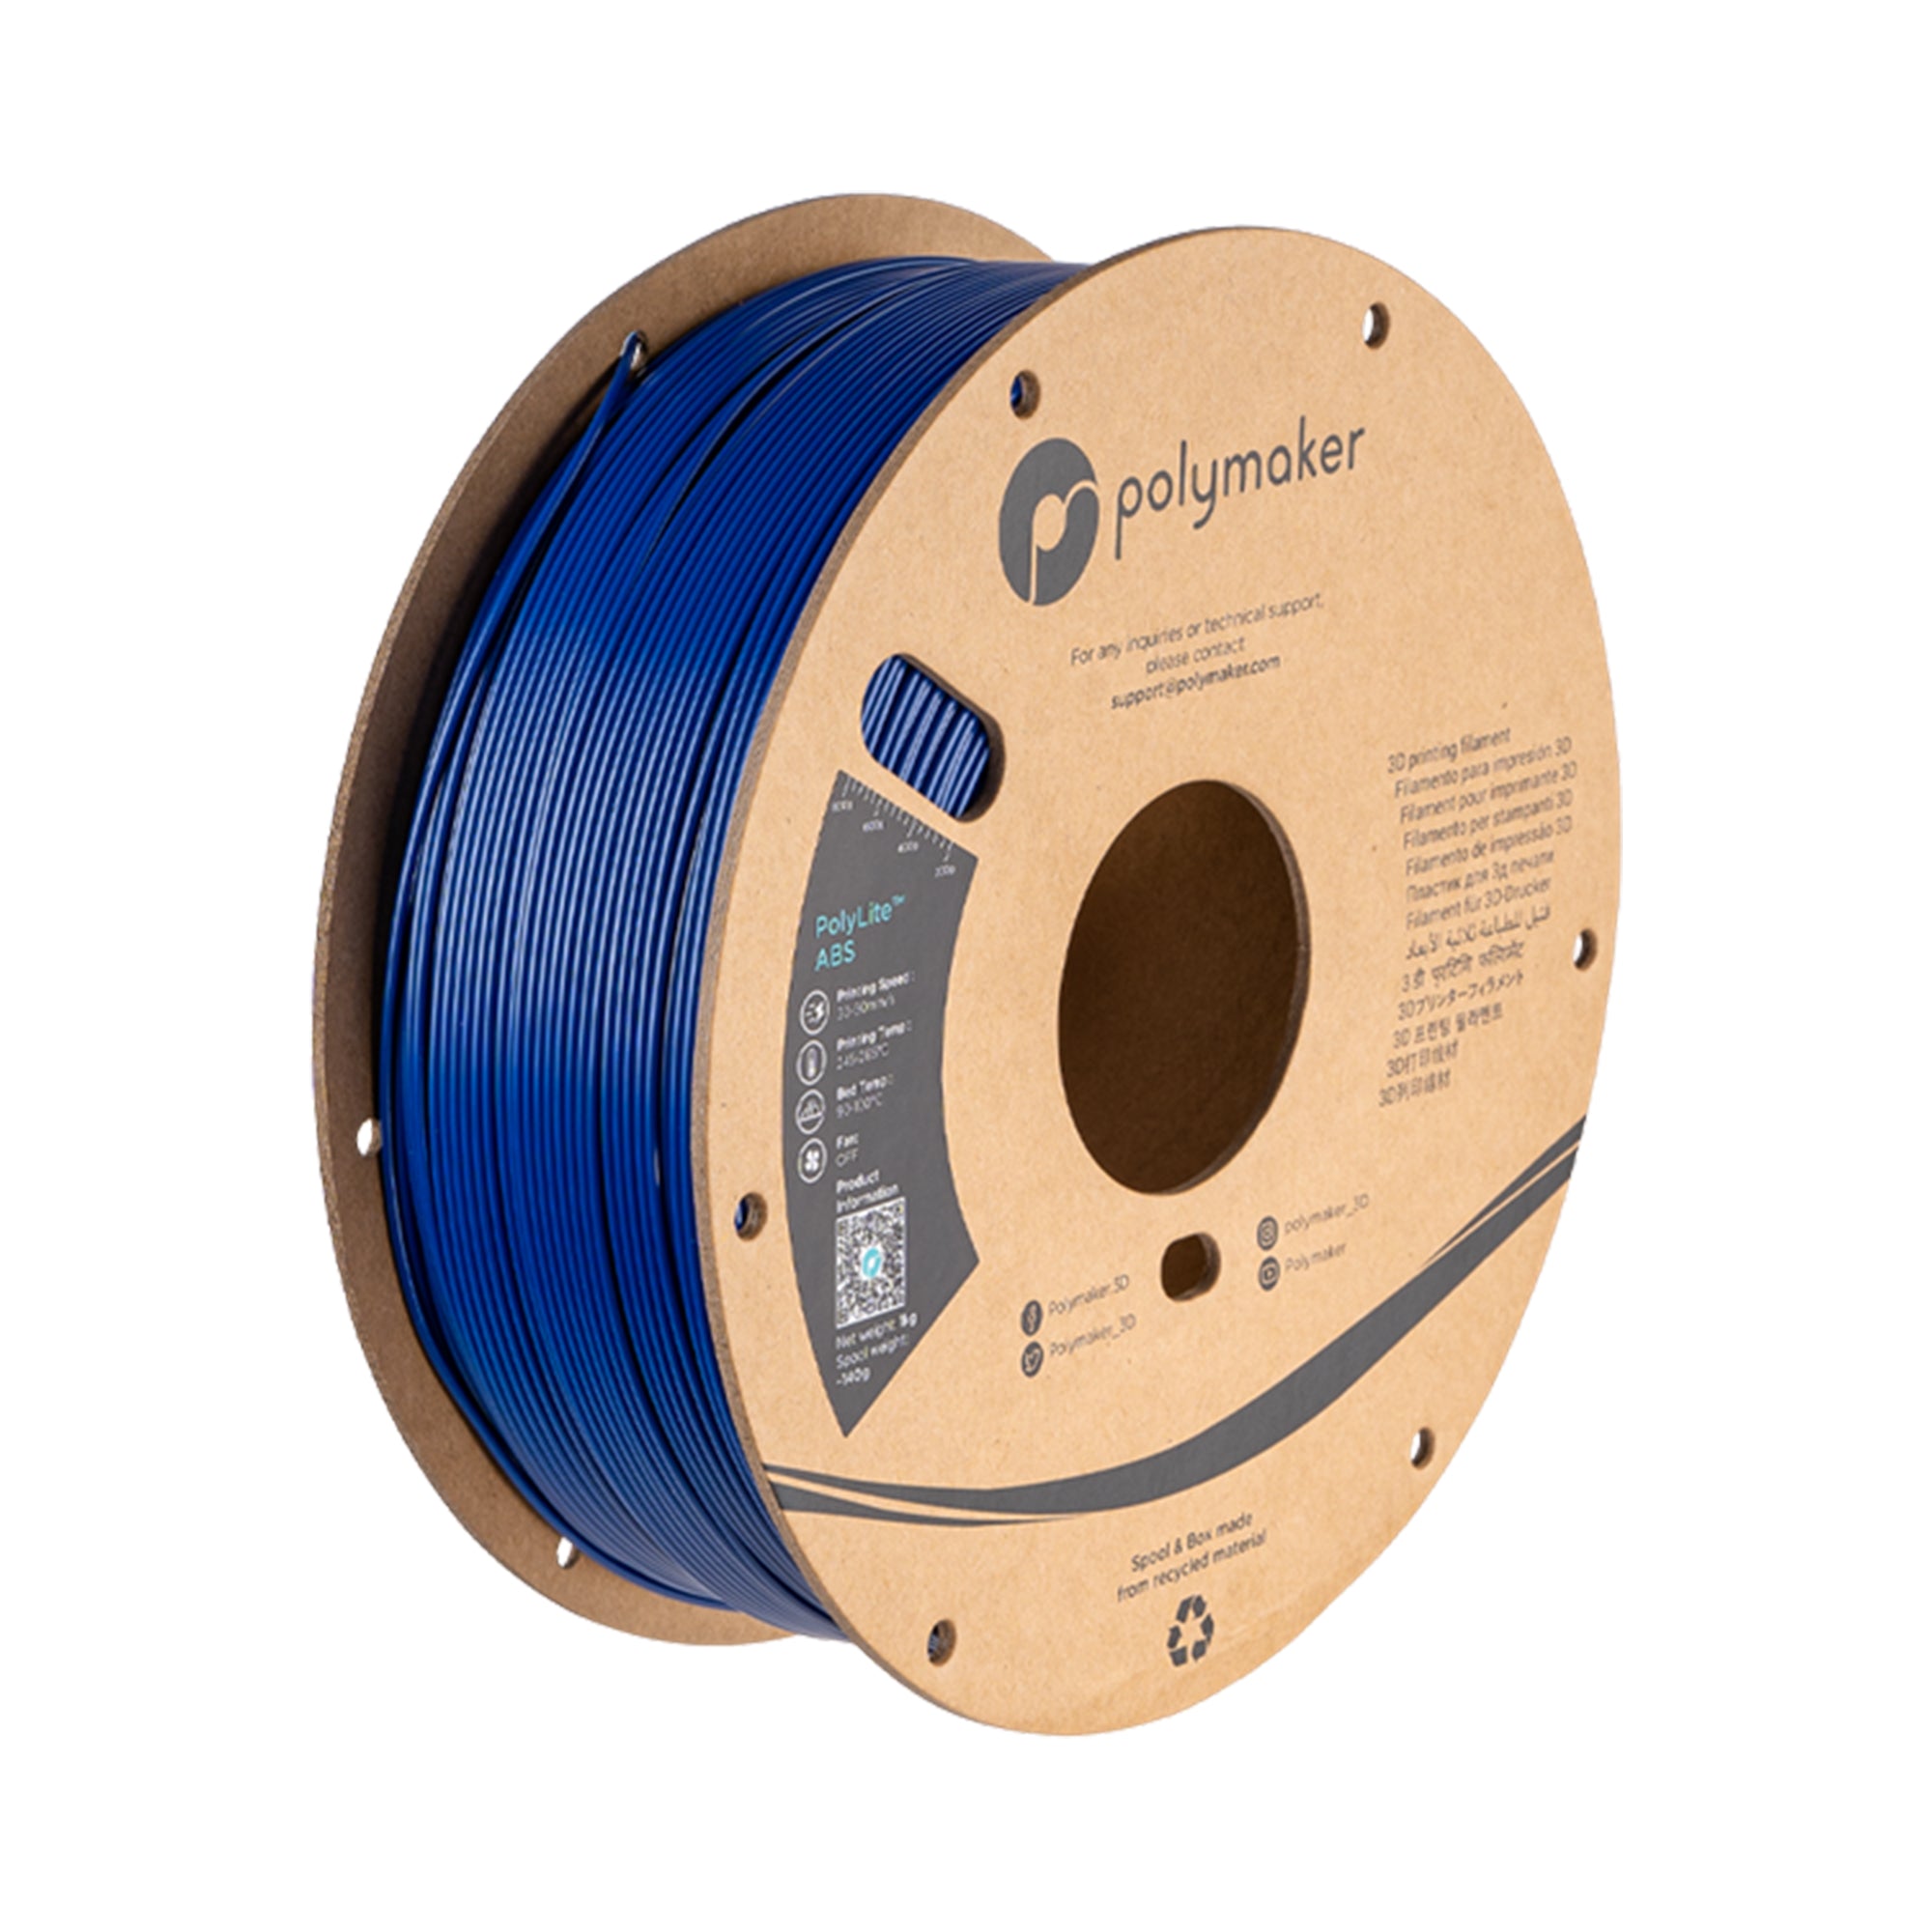 Polymaker PolyLite ABS 1.75mm Filament 1kg